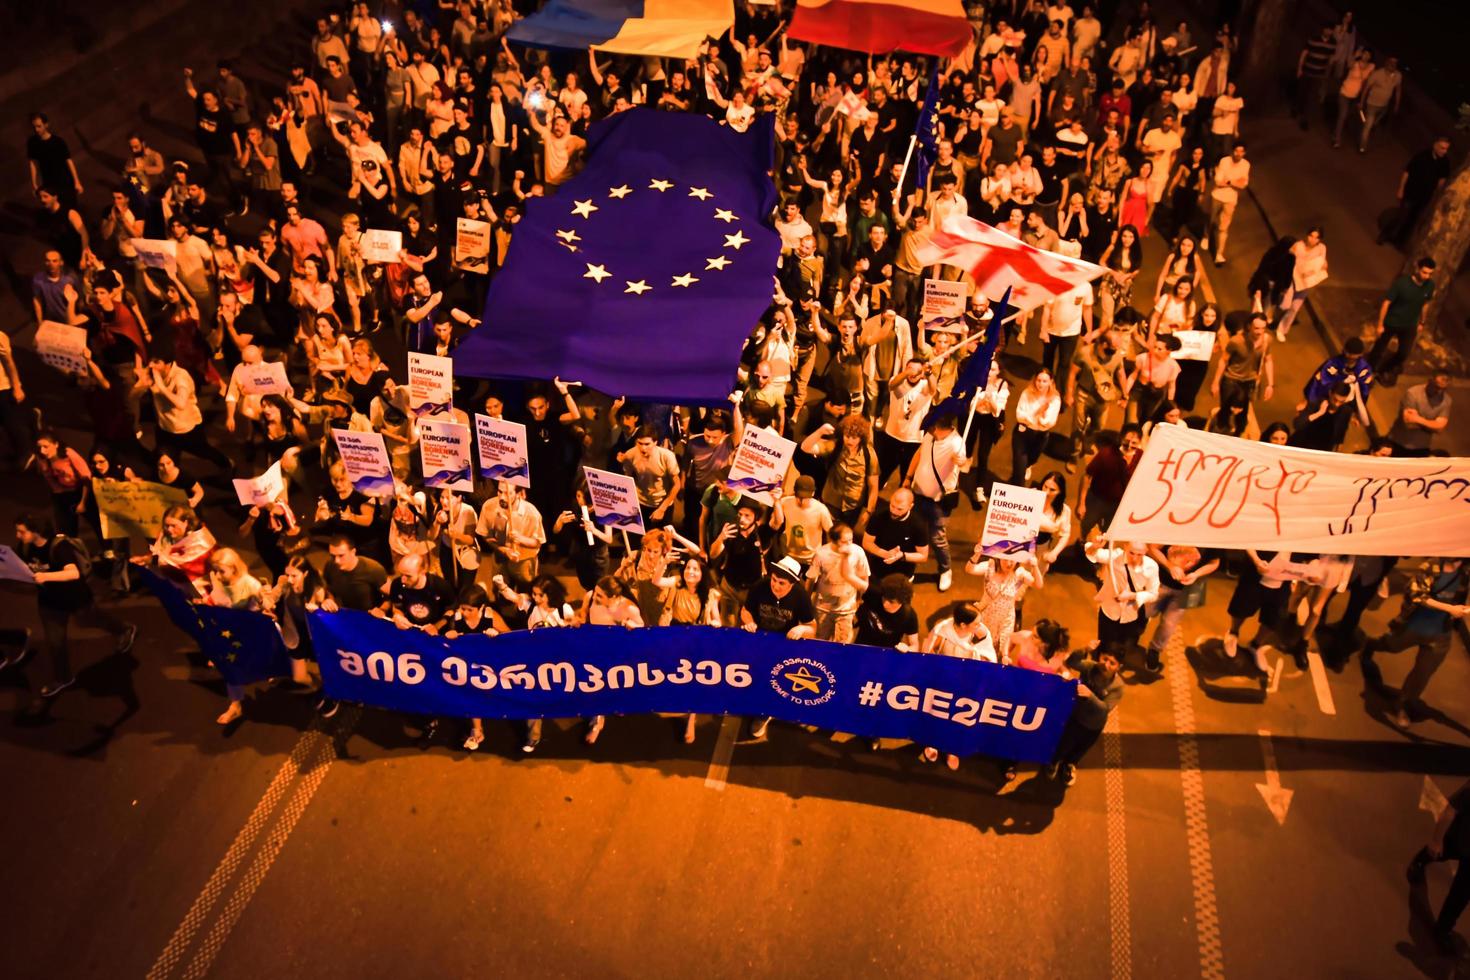 Tbilisi, Georgia , 2022 - Aerial view people march in streets on major EU-pro rally event. Thousands of people on peaceful demonstration event. Pro-Europe rally event in capital city Georgia photo